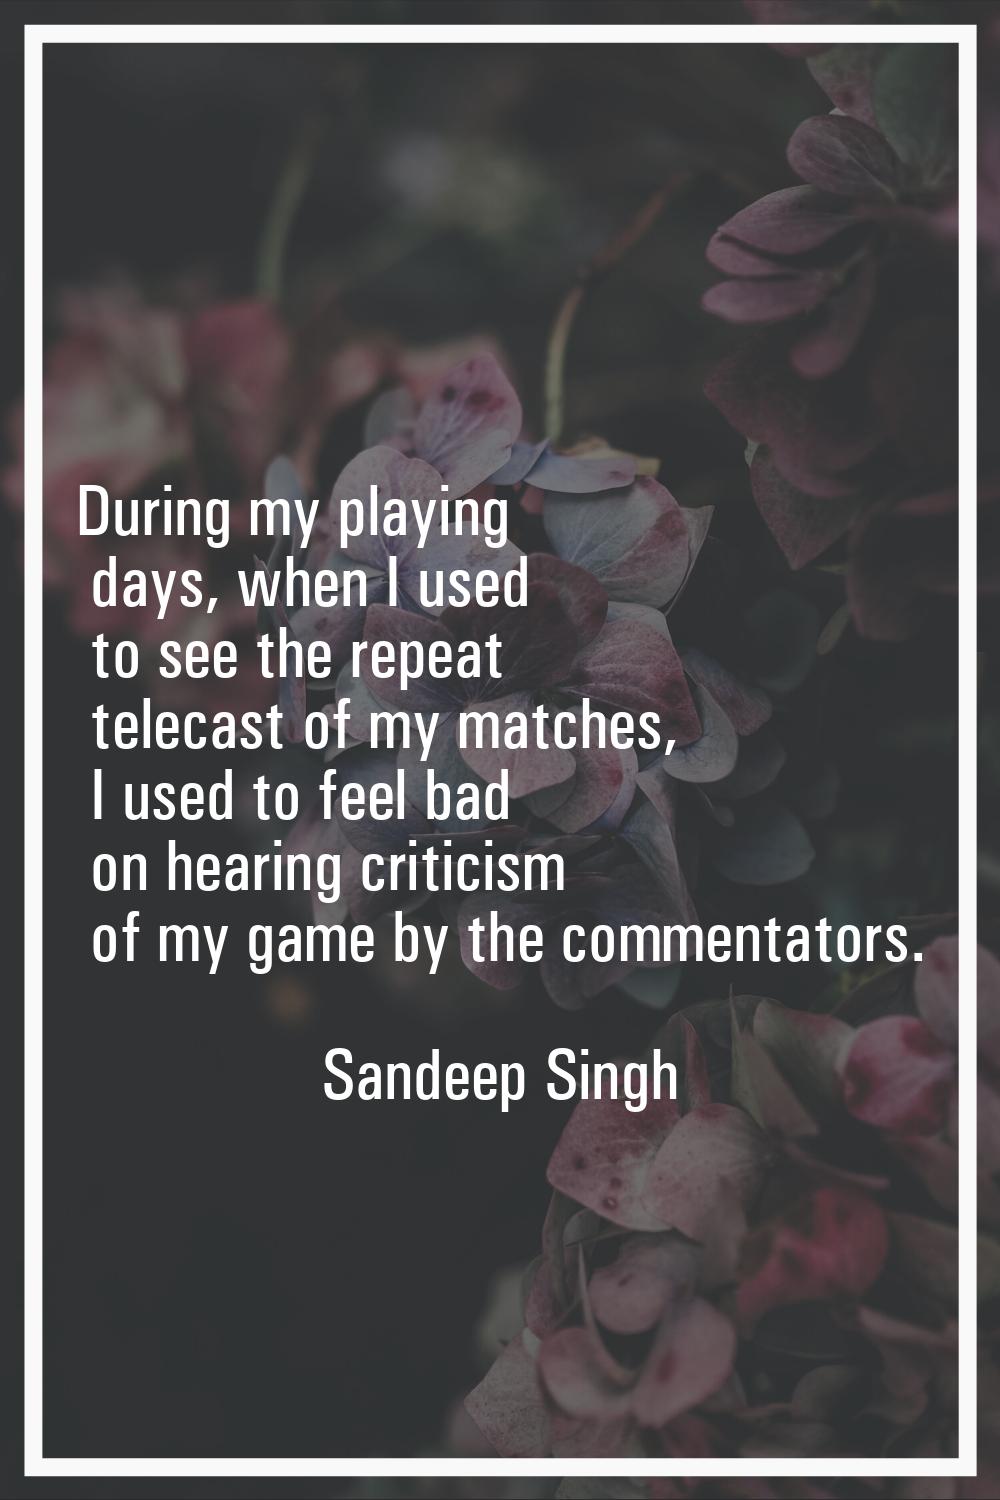 During my playing days, when I used to see the repeat telecast of my matches, I used to feel bad on